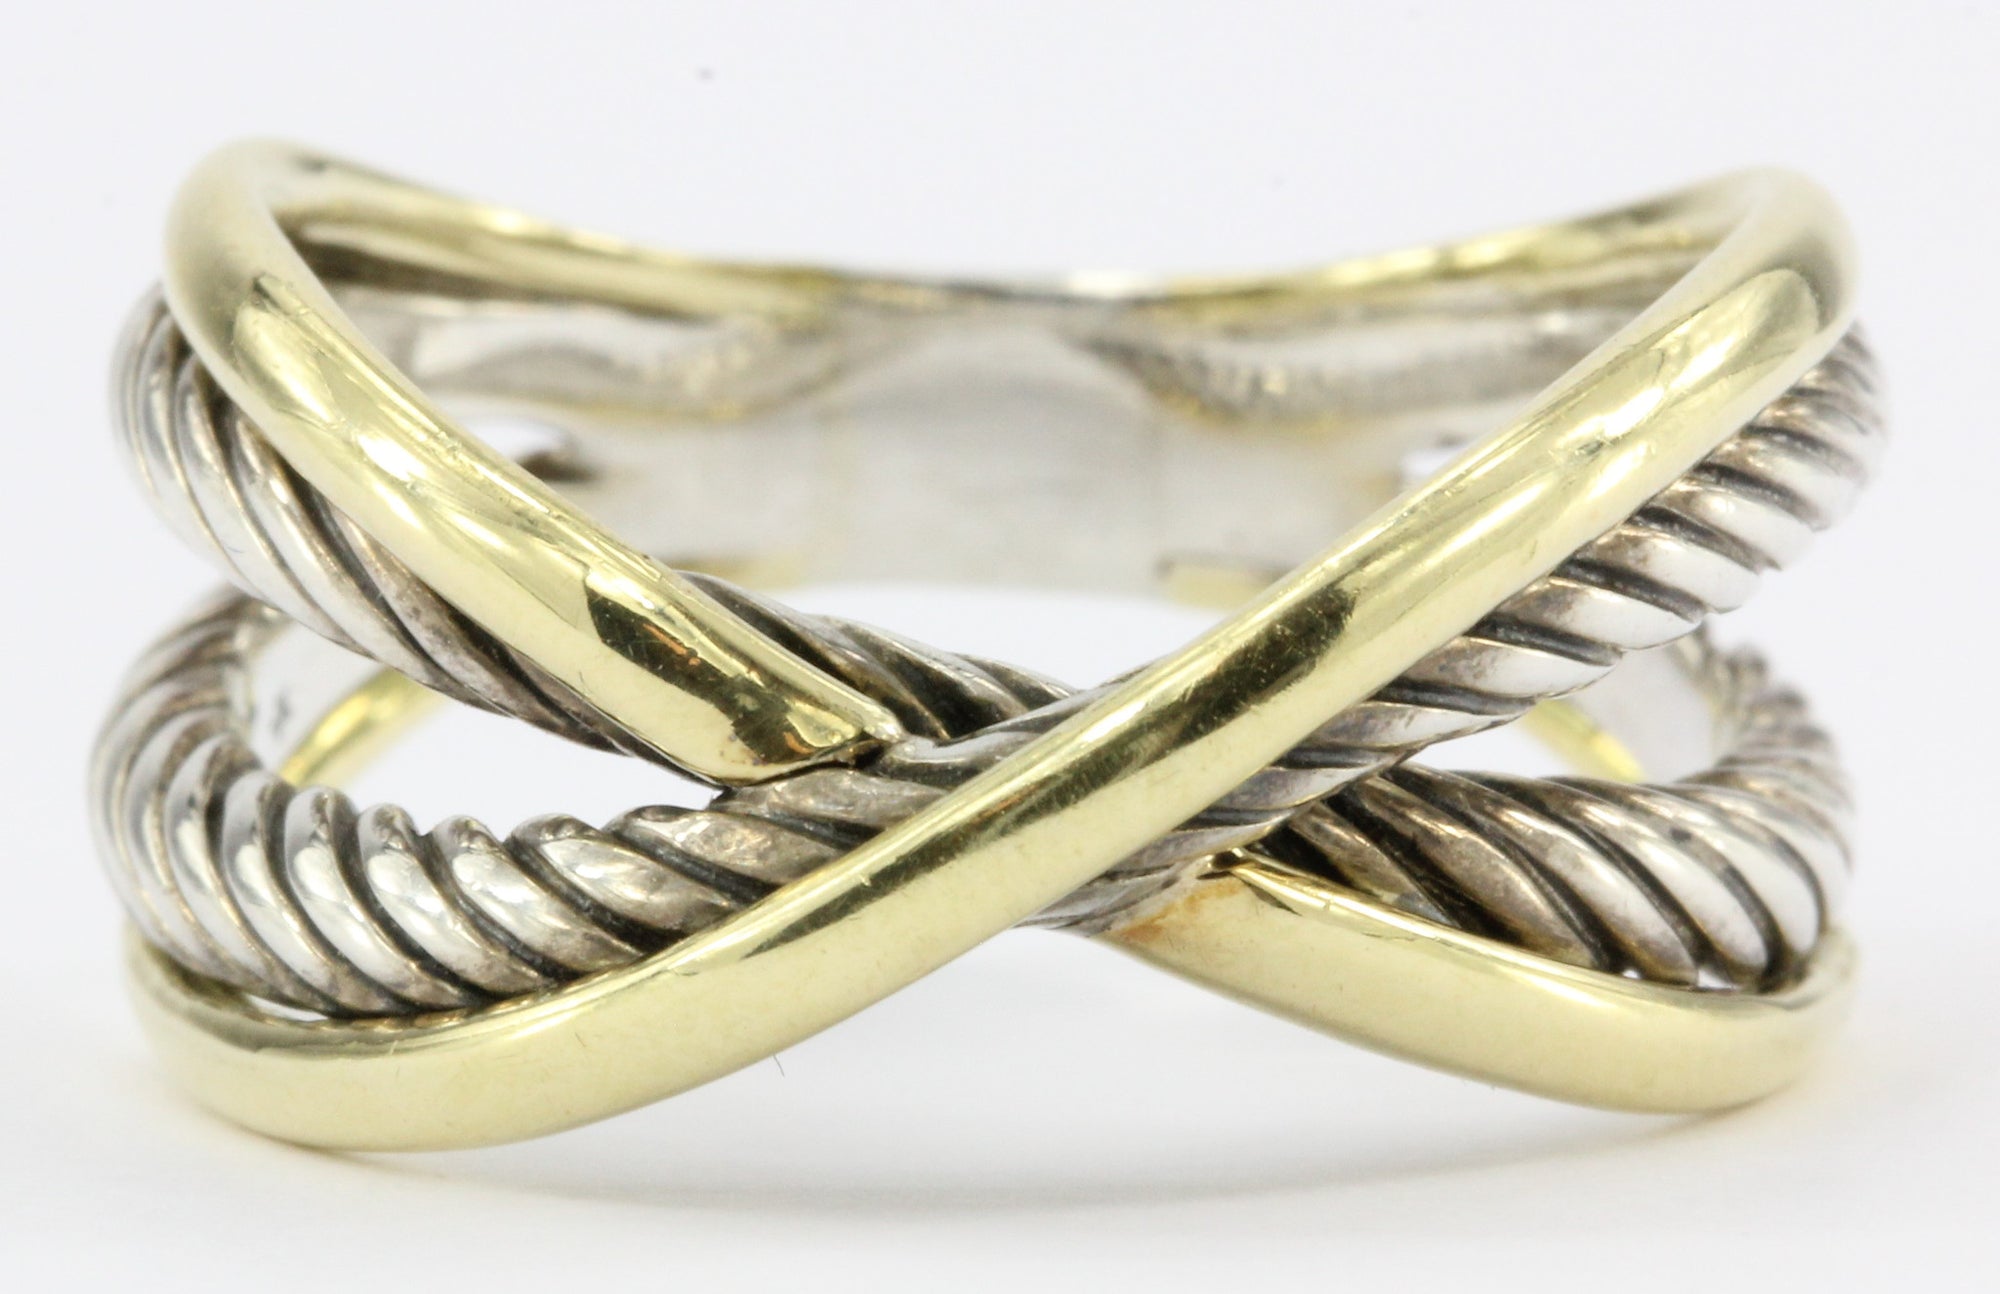 David Yurman 18k Gold Sterling X Crossover Cable Ring Size 8.75 – QUEEN MAY